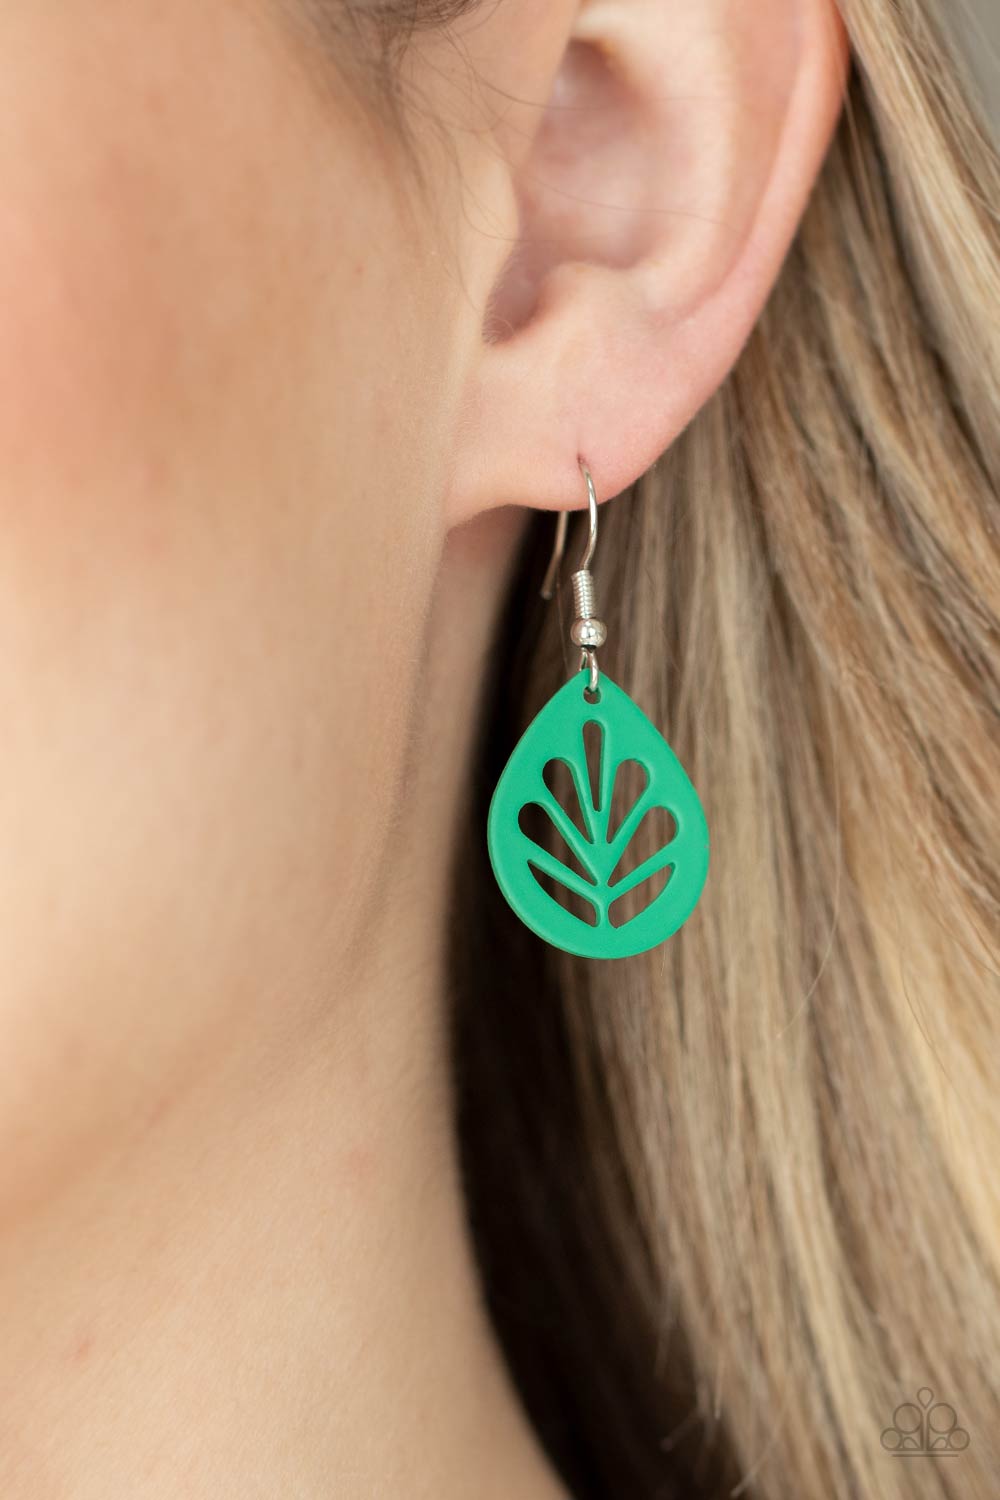 &lt;p&gt; A dainty Mint Green leaf frame is stenciled in airy cutouts for a whimsical seasonal fashion. Earring attaches to a standard fishhook fitting.&lt;/p&gt;  

&lt;p&gt; &lt;i&gt;  Sold as one pair of earrings. &lt;/i&gt;  &lt;/p&gt;

&lt;img src=\&quot;https://d9b54x484lq62.cloudfront.net/paparazzi/shopping/images/517_tag150x115_1.png\&quot; alt=\&quot;New Kit\&quot; align=\&quot;middle\&quot; height=\&quot;50\&quot; width=\&quot;50\&quot;&gt;